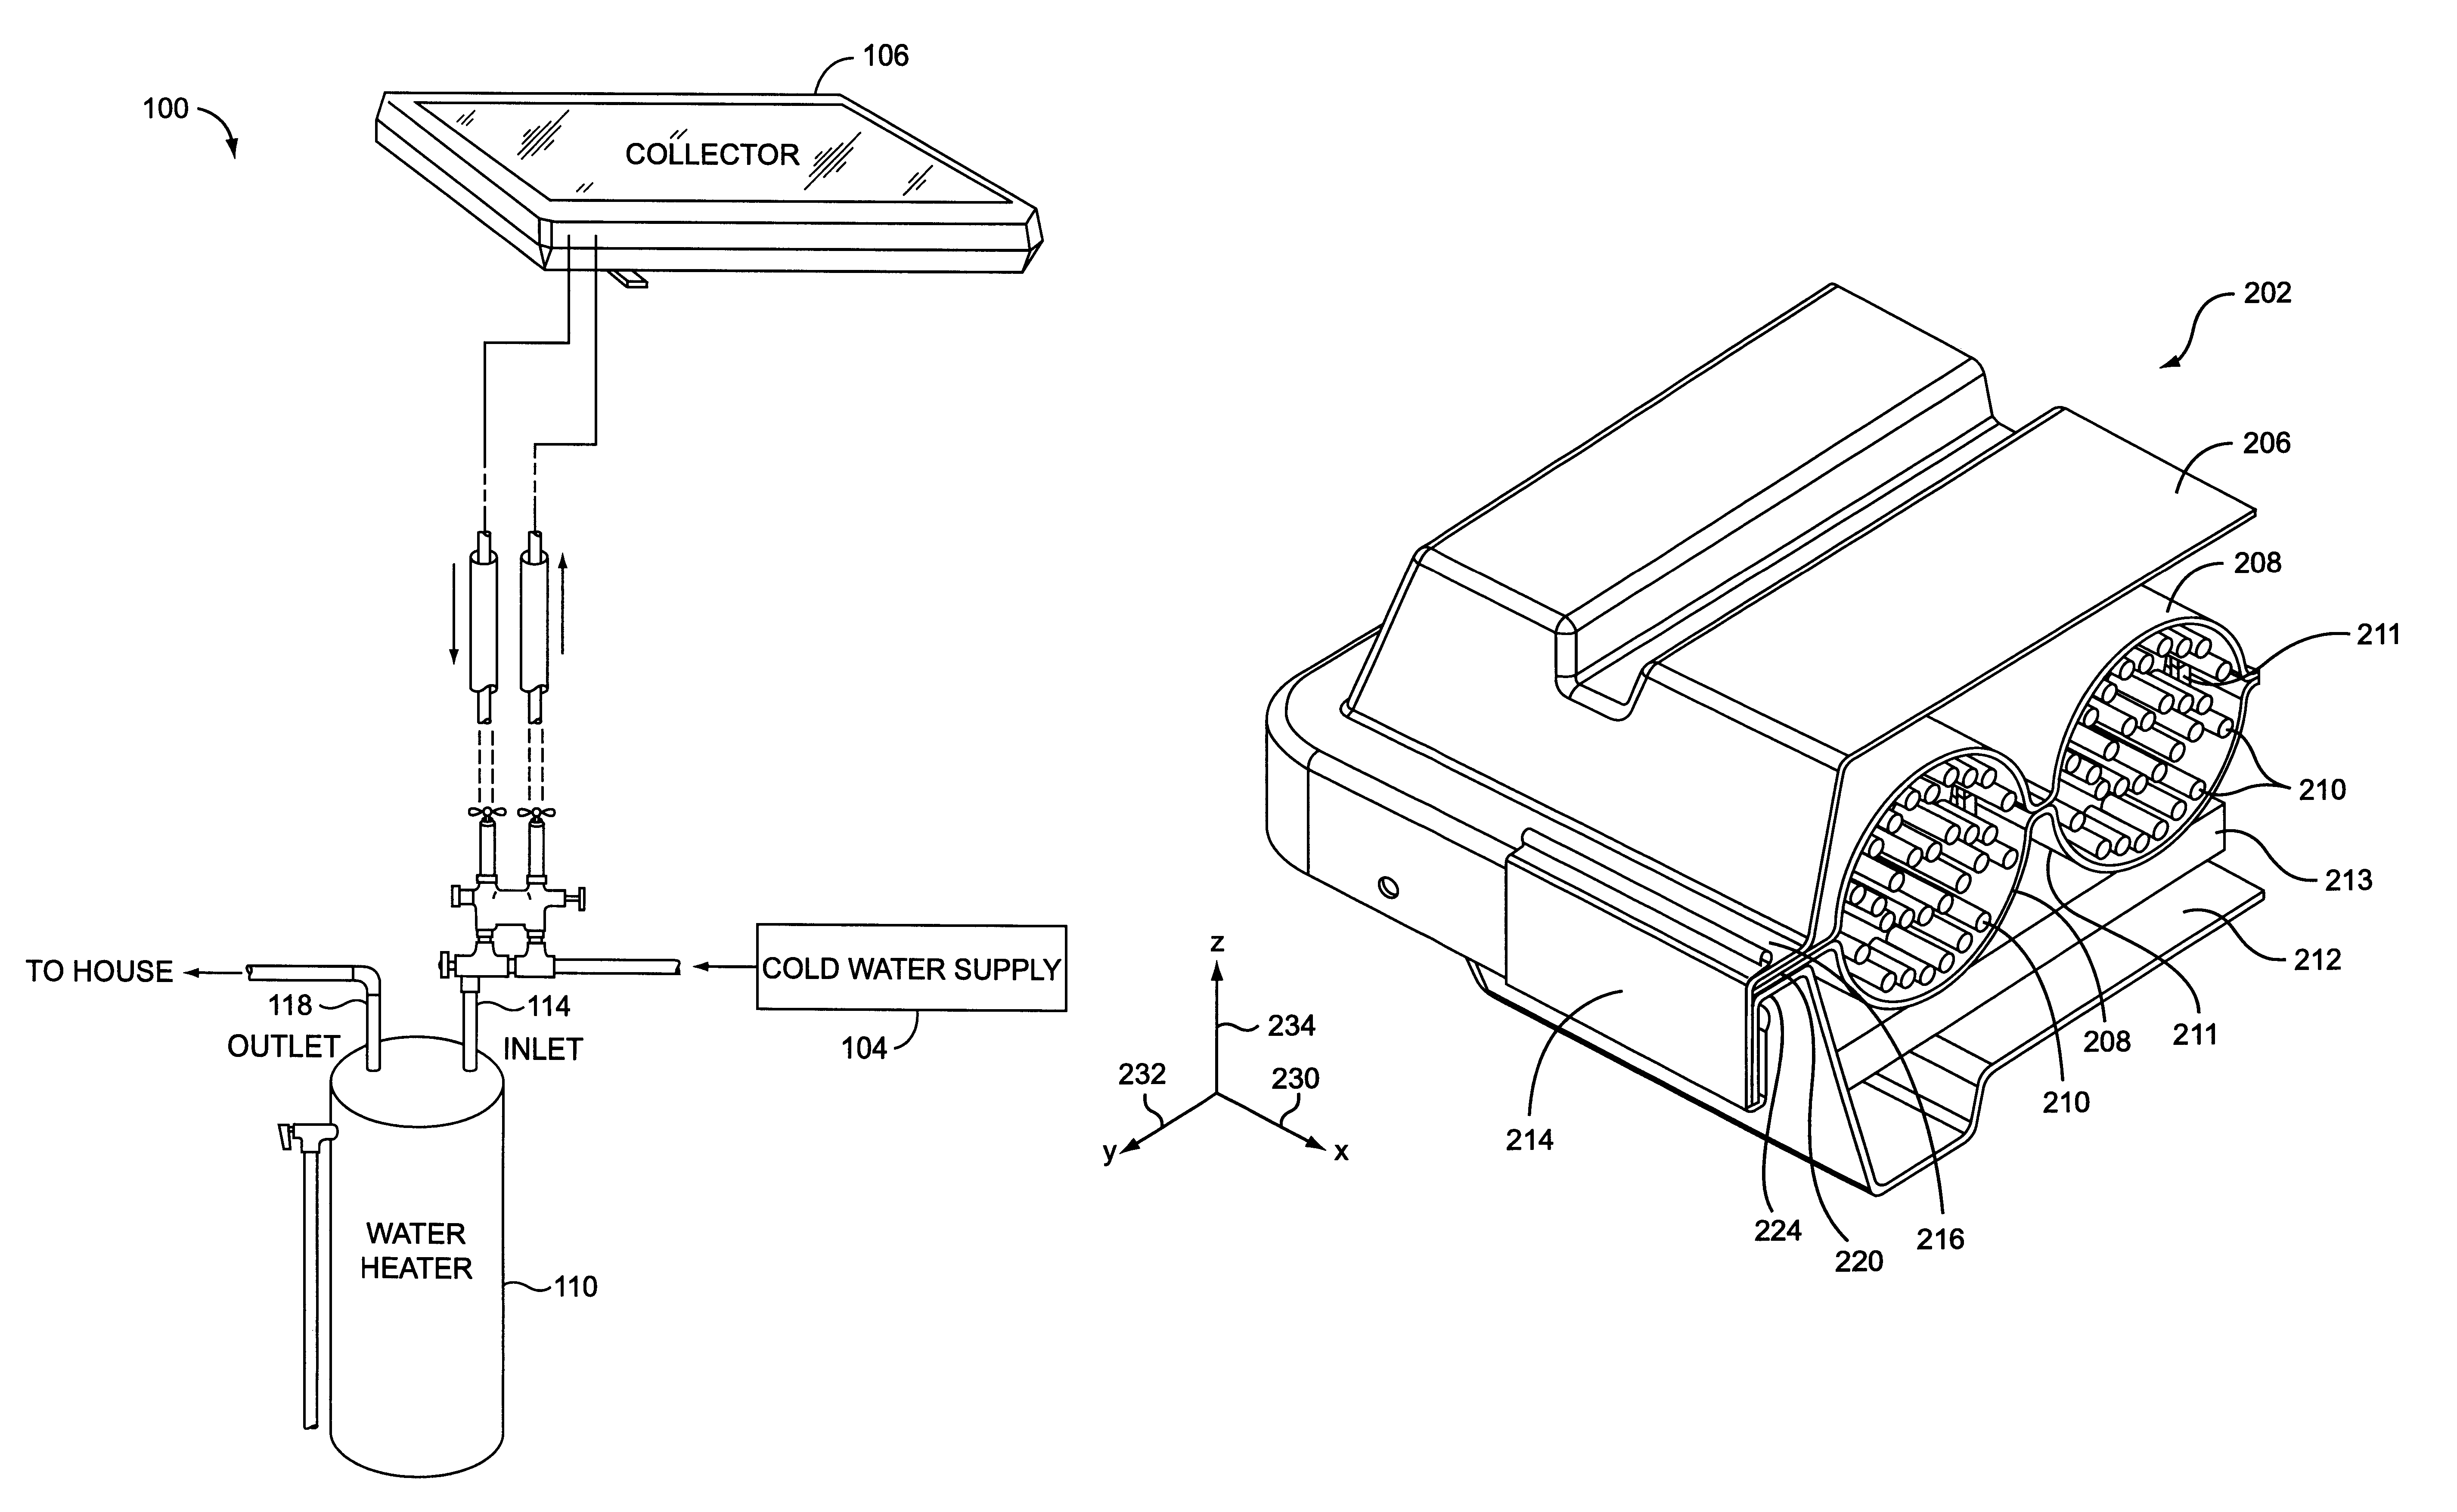 Integral collector storage system with heat exchange apparatus